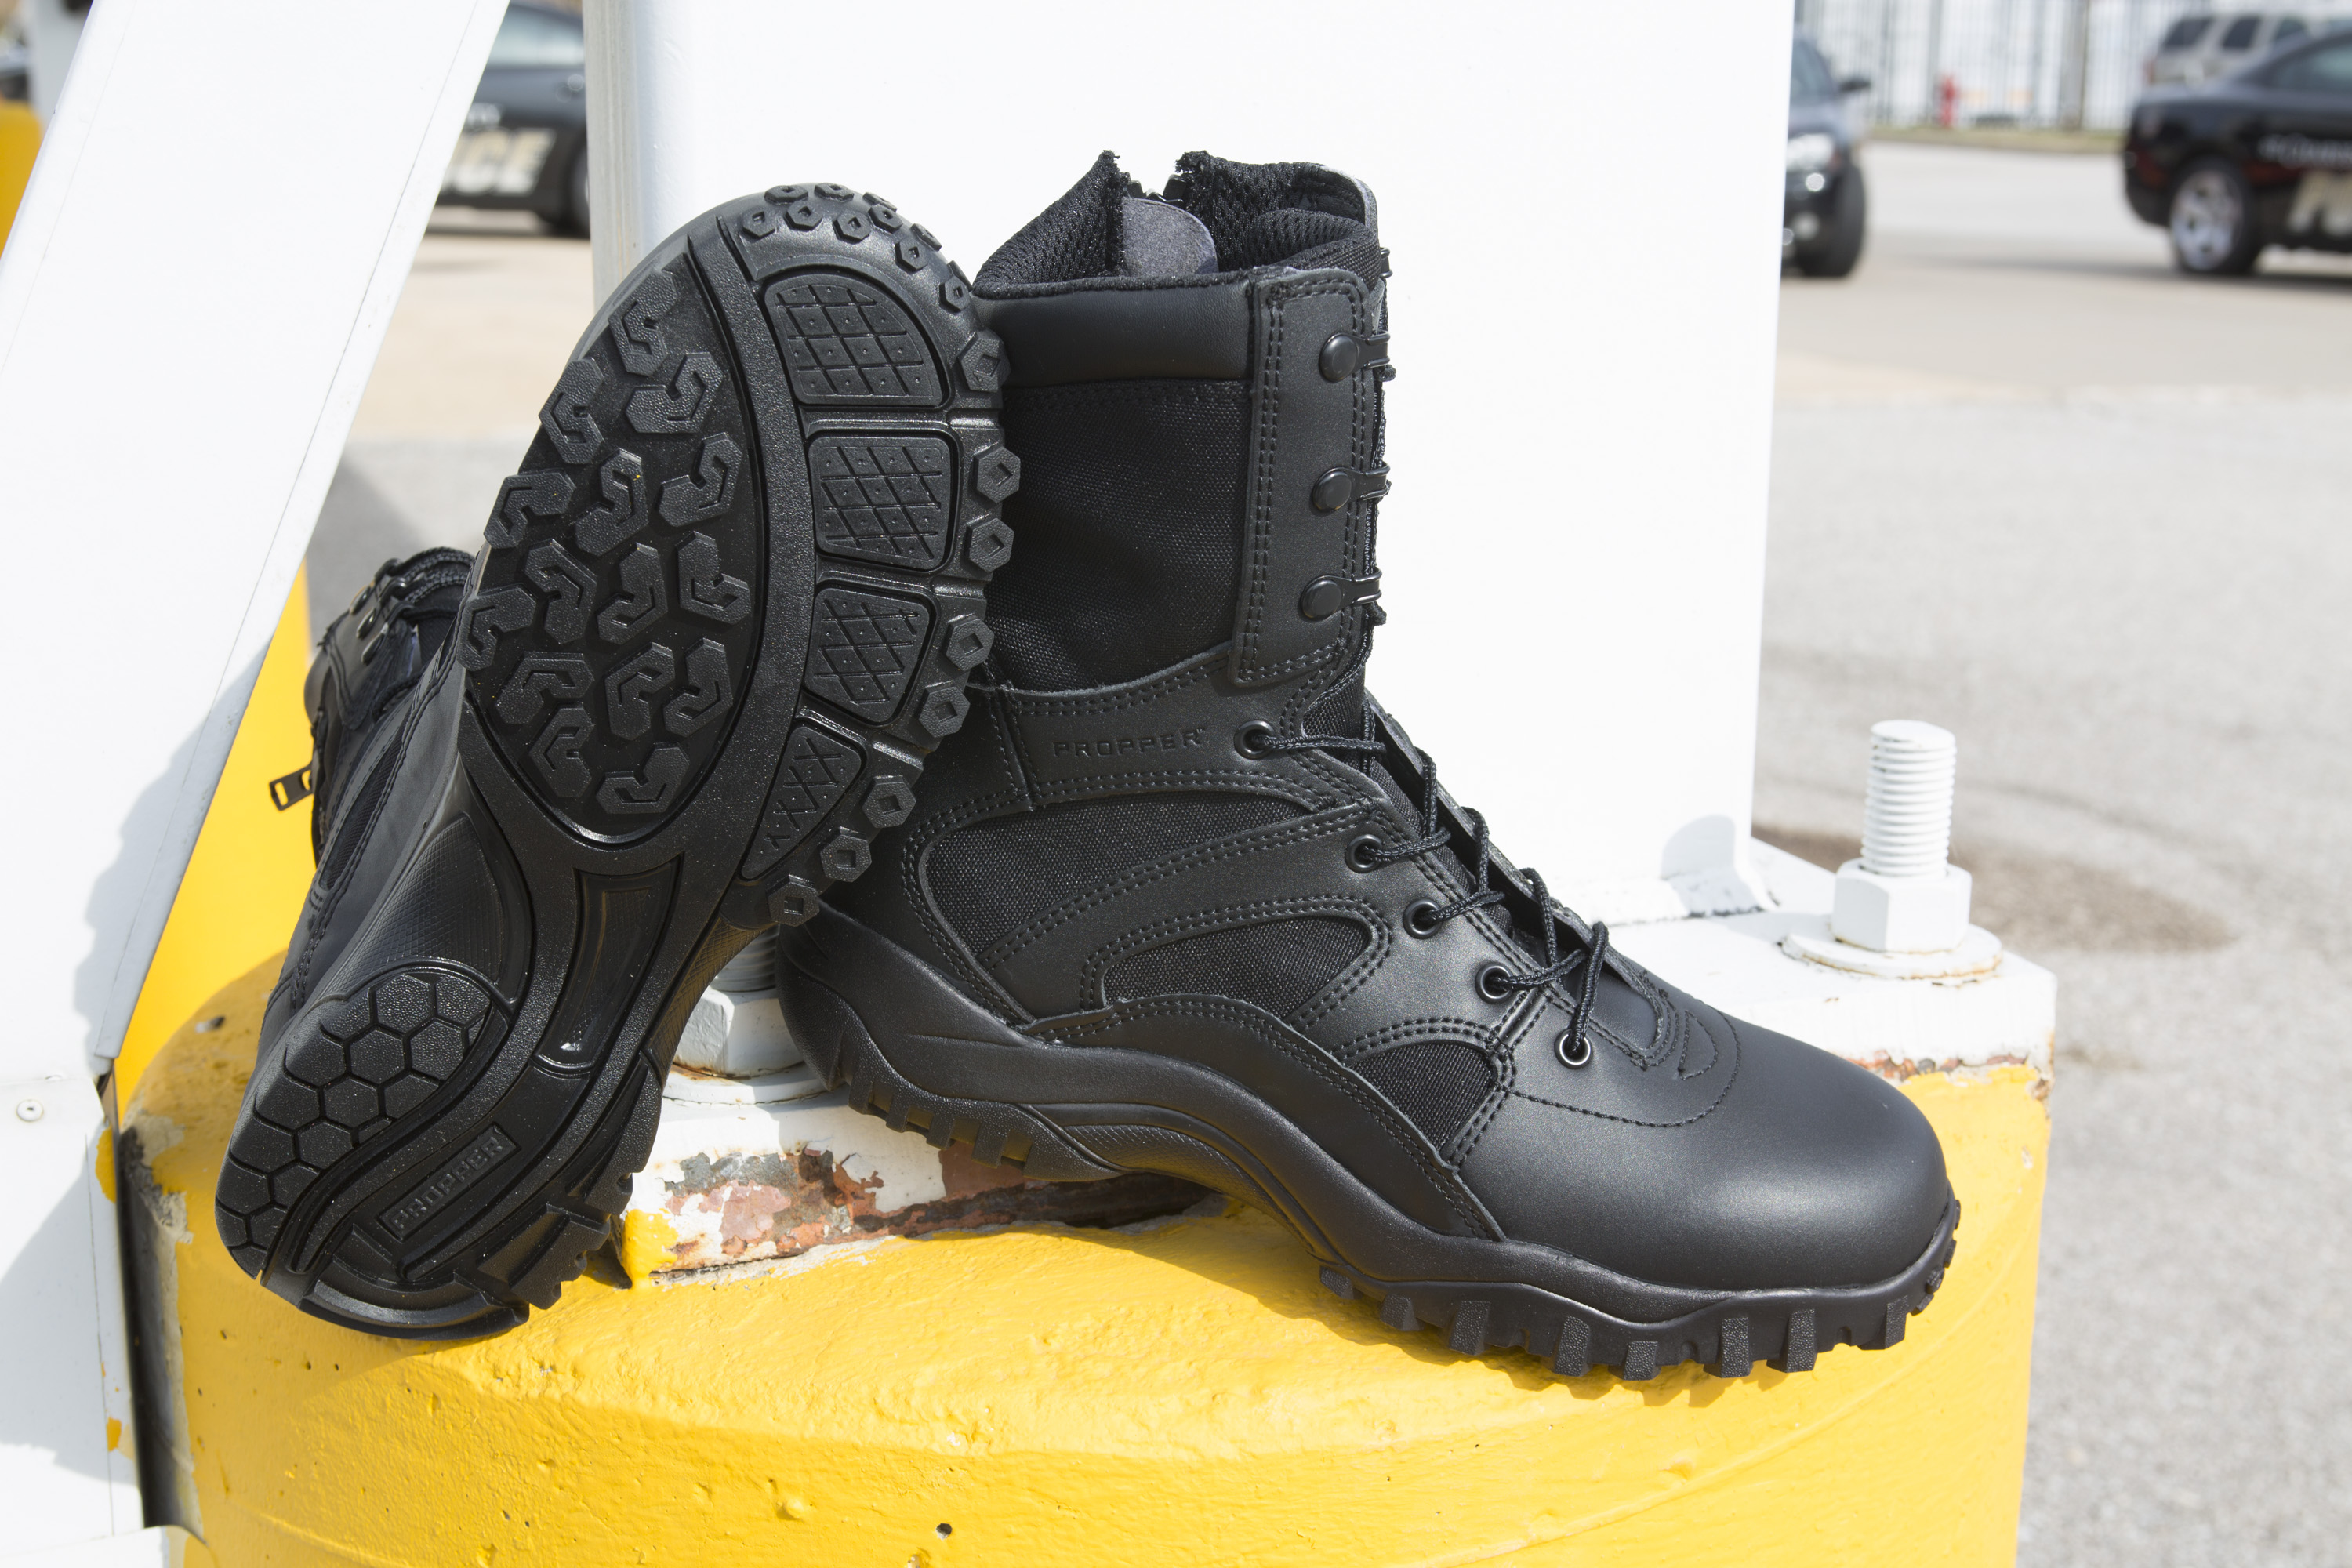 The Tactical Duty Boot's comfort comes from an athletic performance rubber sole with EVA cushioning and padded collar.